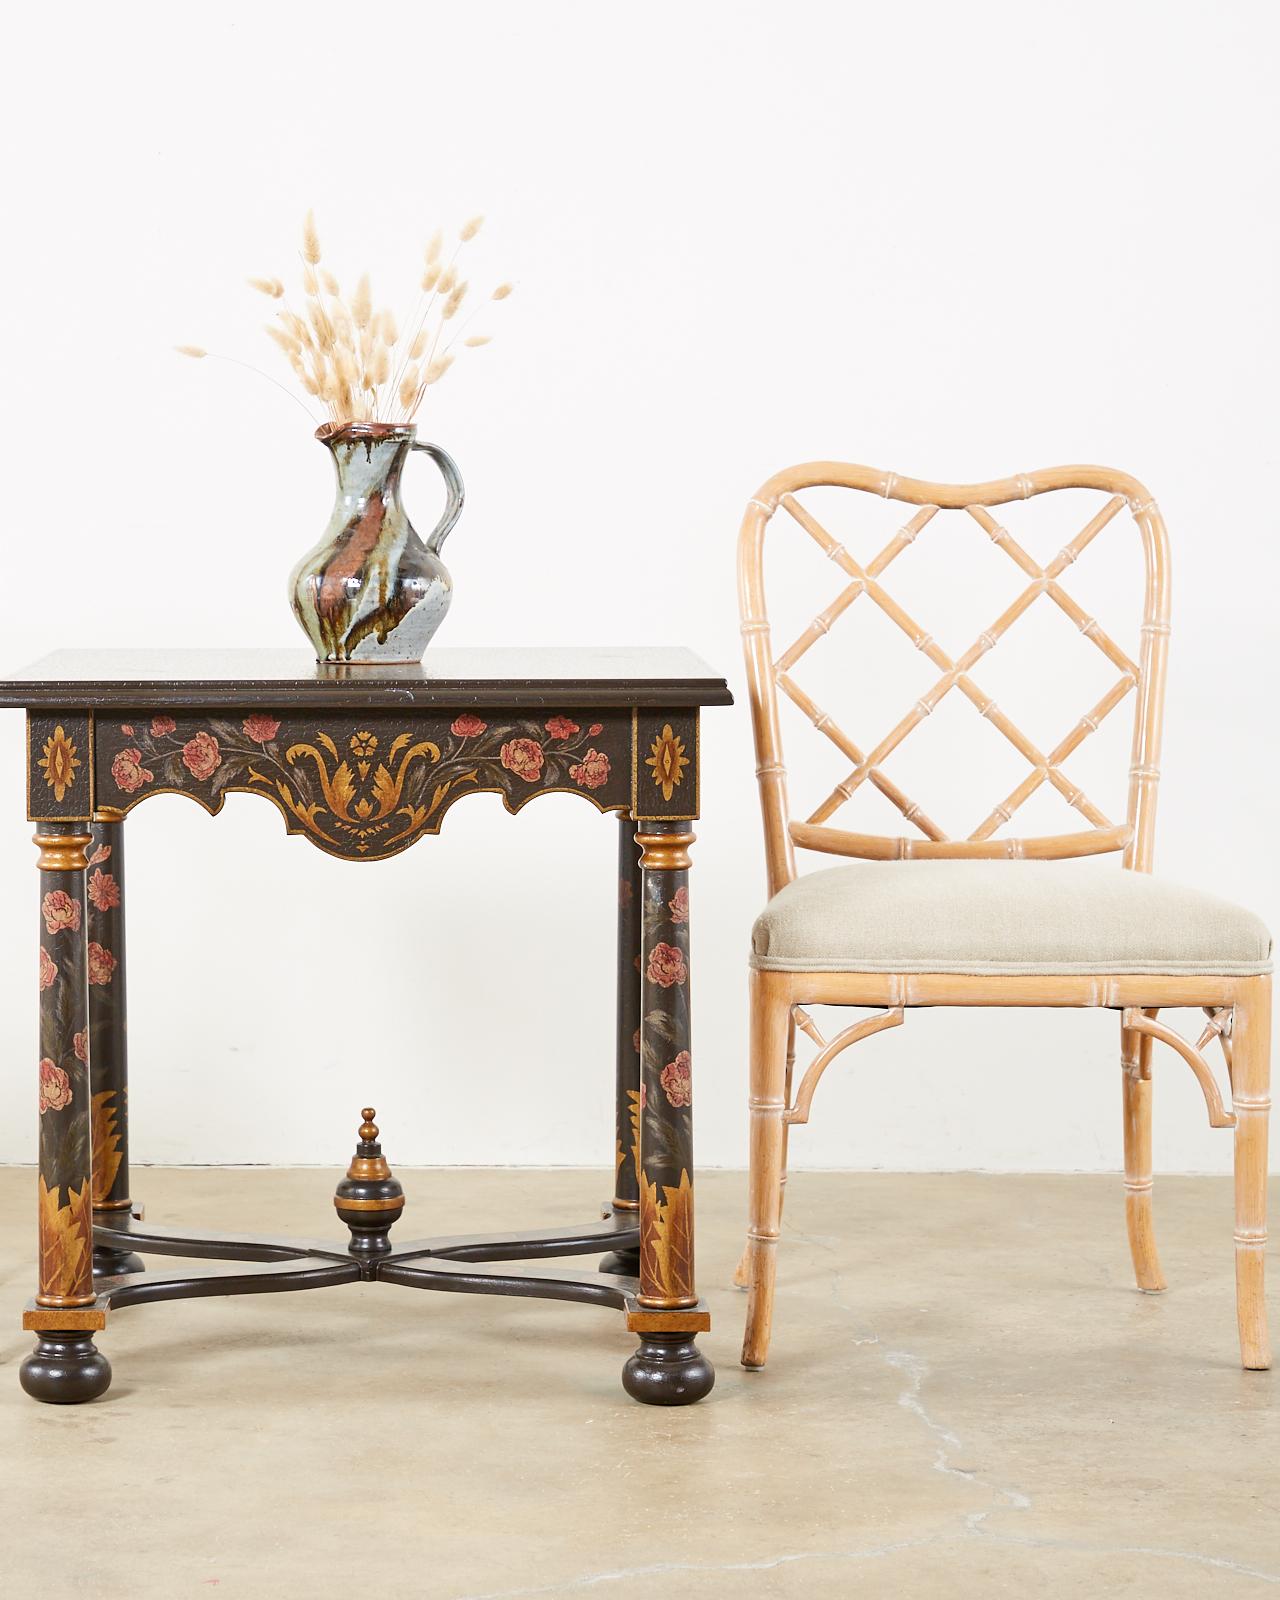 Distinctive set of three dining chairs featuring handcrafted faux-bamboo frames. Made in the Chinese Chippendale taste with geometric design open fretwork backs and finish with a cerused or white washed patina that showcases the light blonde wood.